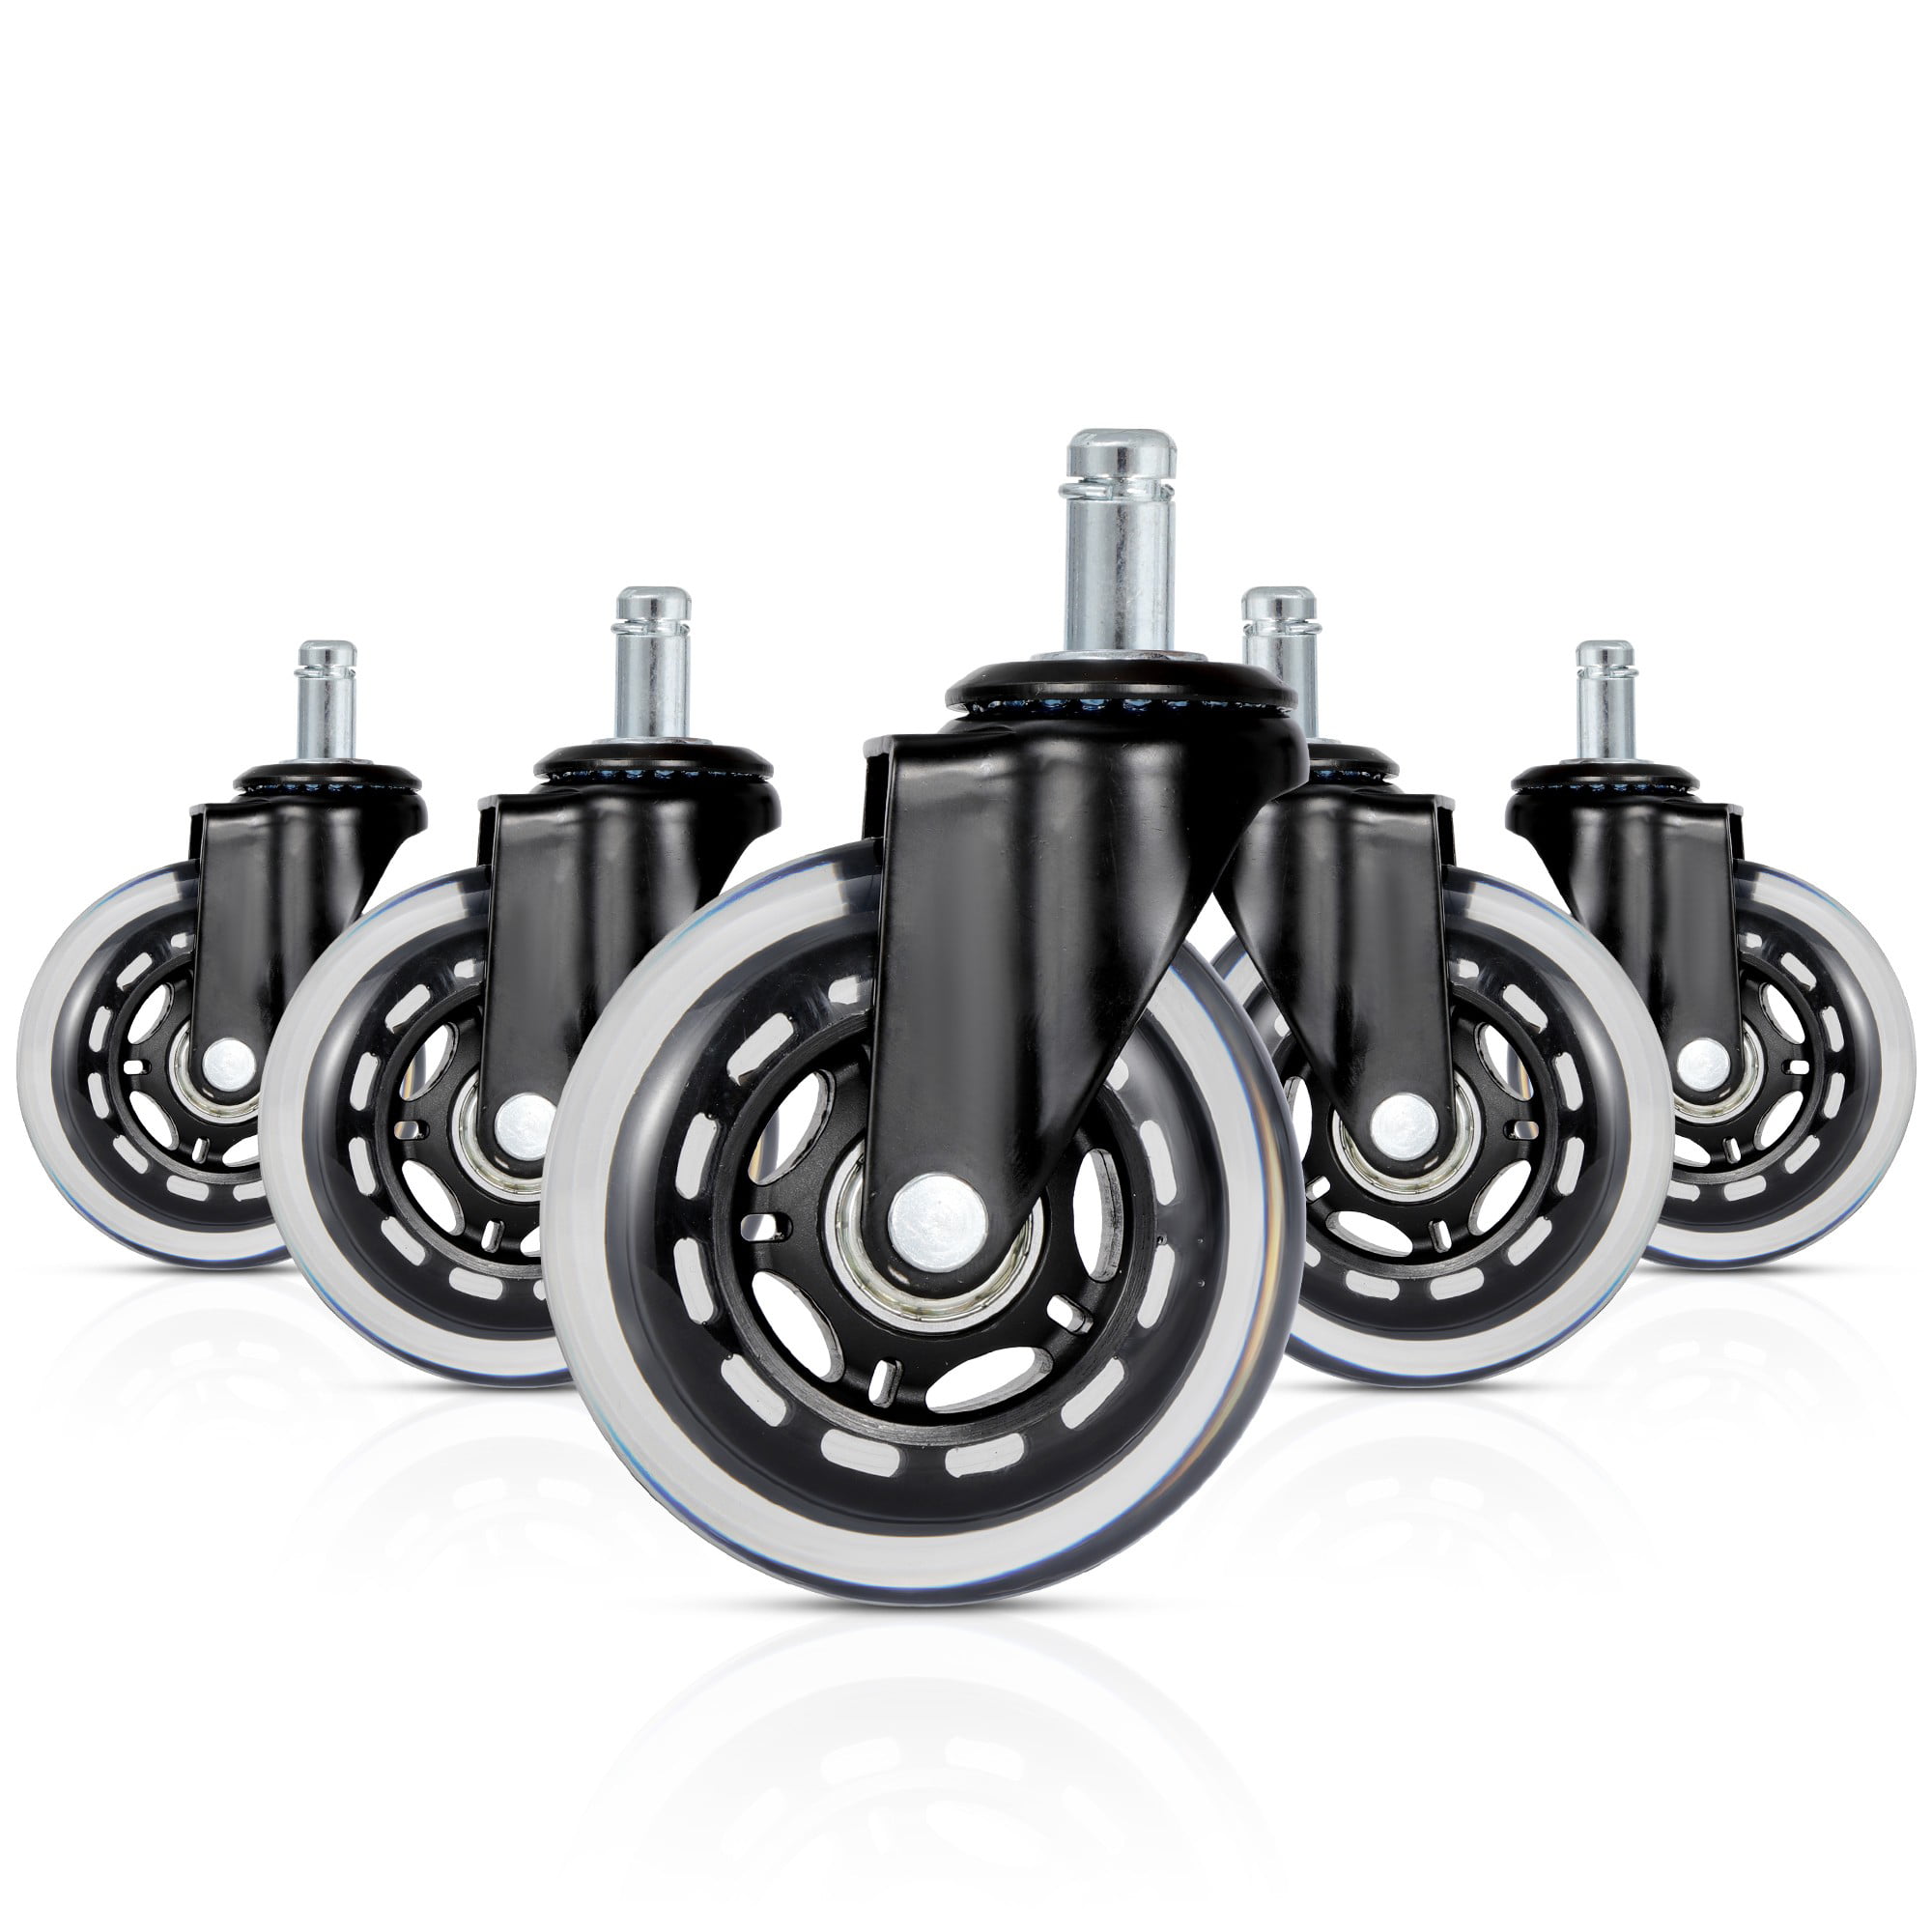 Office Chair Wheels Rollerblade Casters, Chair Casters For Hardwood Floors